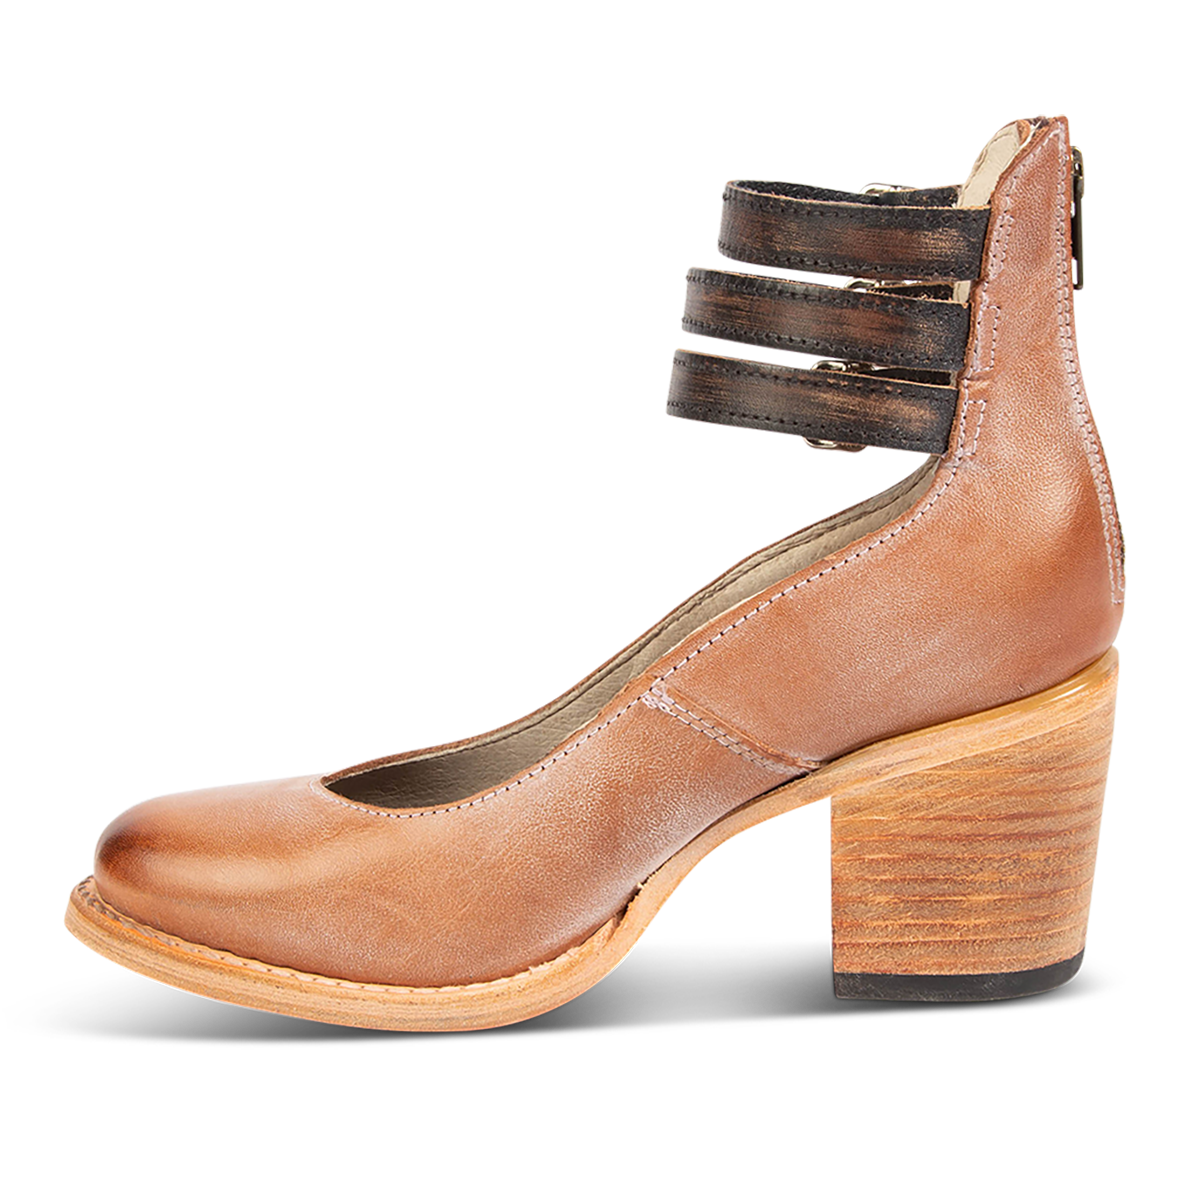 Inside view showing an open construction and wood heel with three adjustable ankle straps on FREEBIRD women’s Randi dusty rose shoe